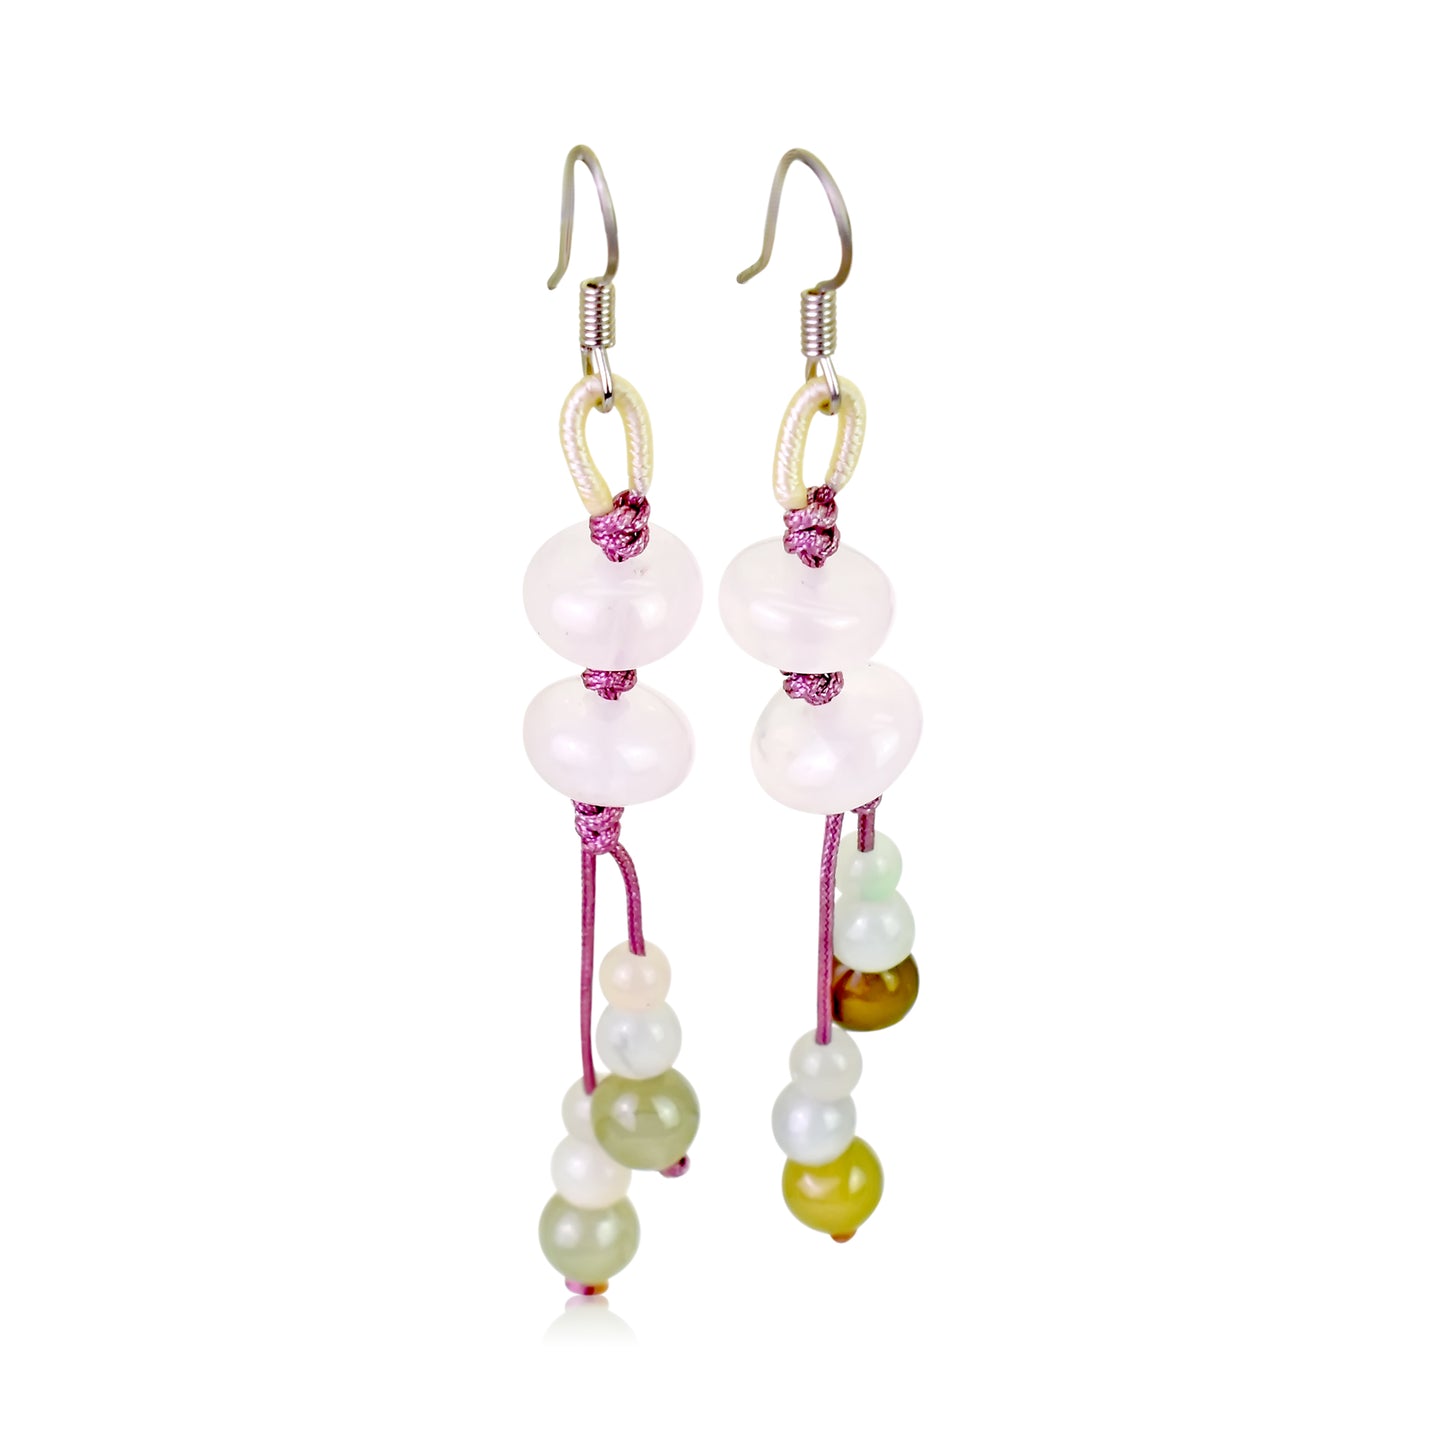 Add a Soft Touch to Your Outfit with Rose Quartz Earrings made with Lavender Cord